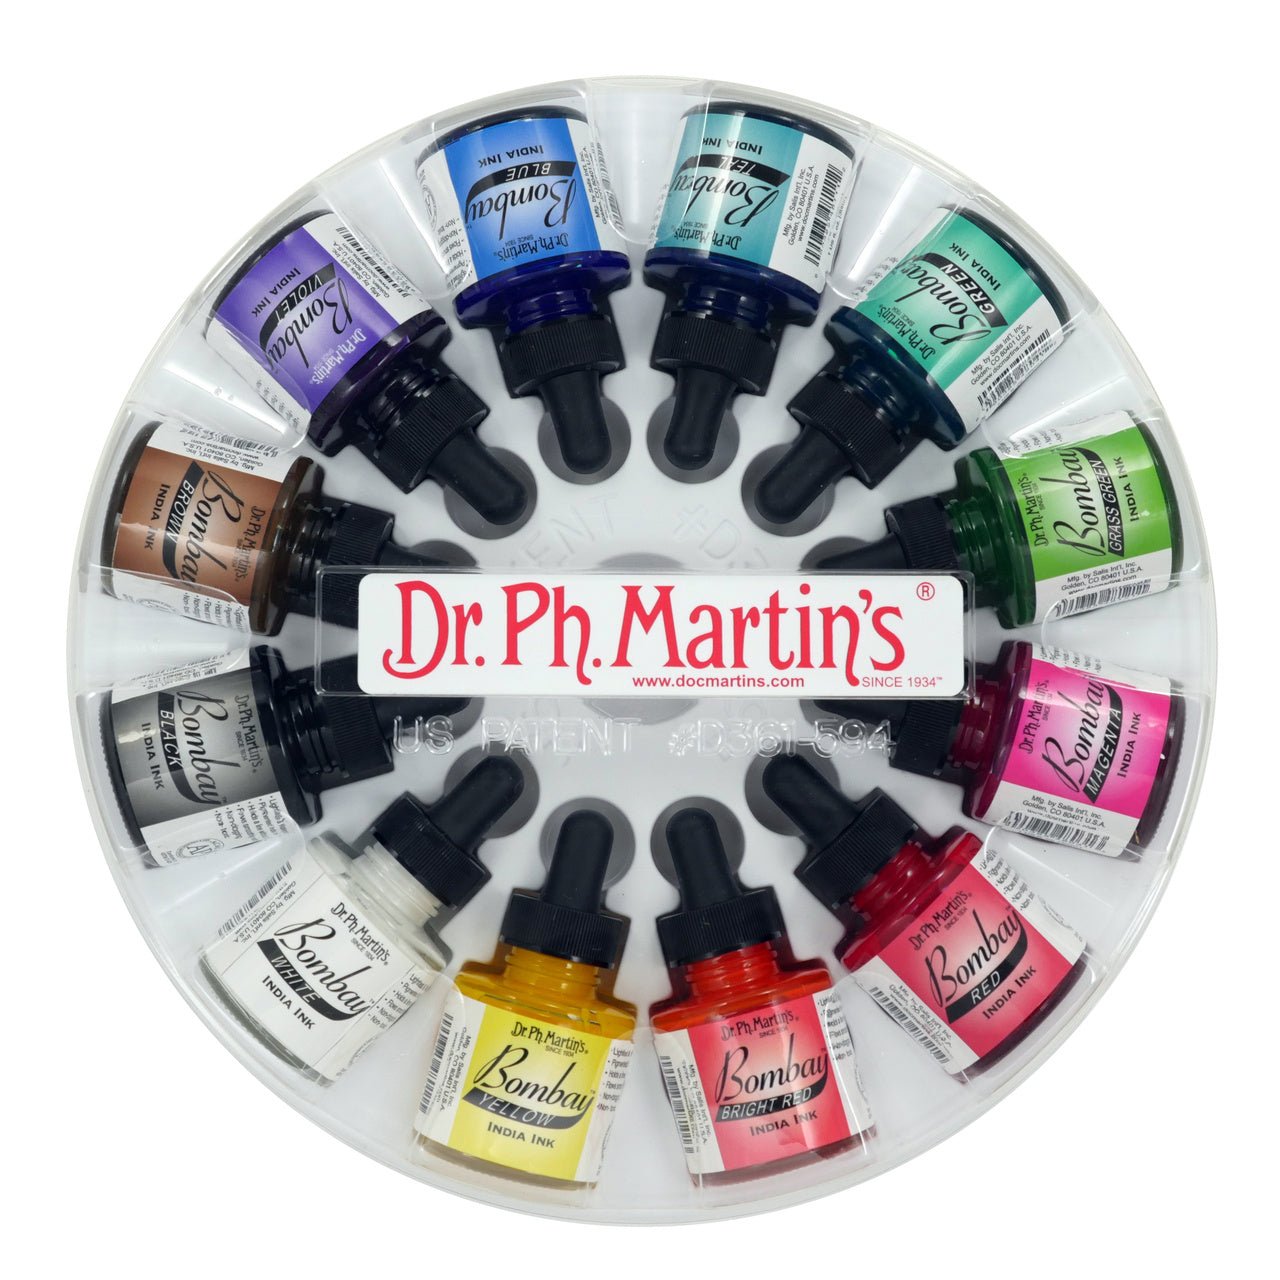 Dr. P.H. Martin  Bombay India Ink -  1 ounce Set #1